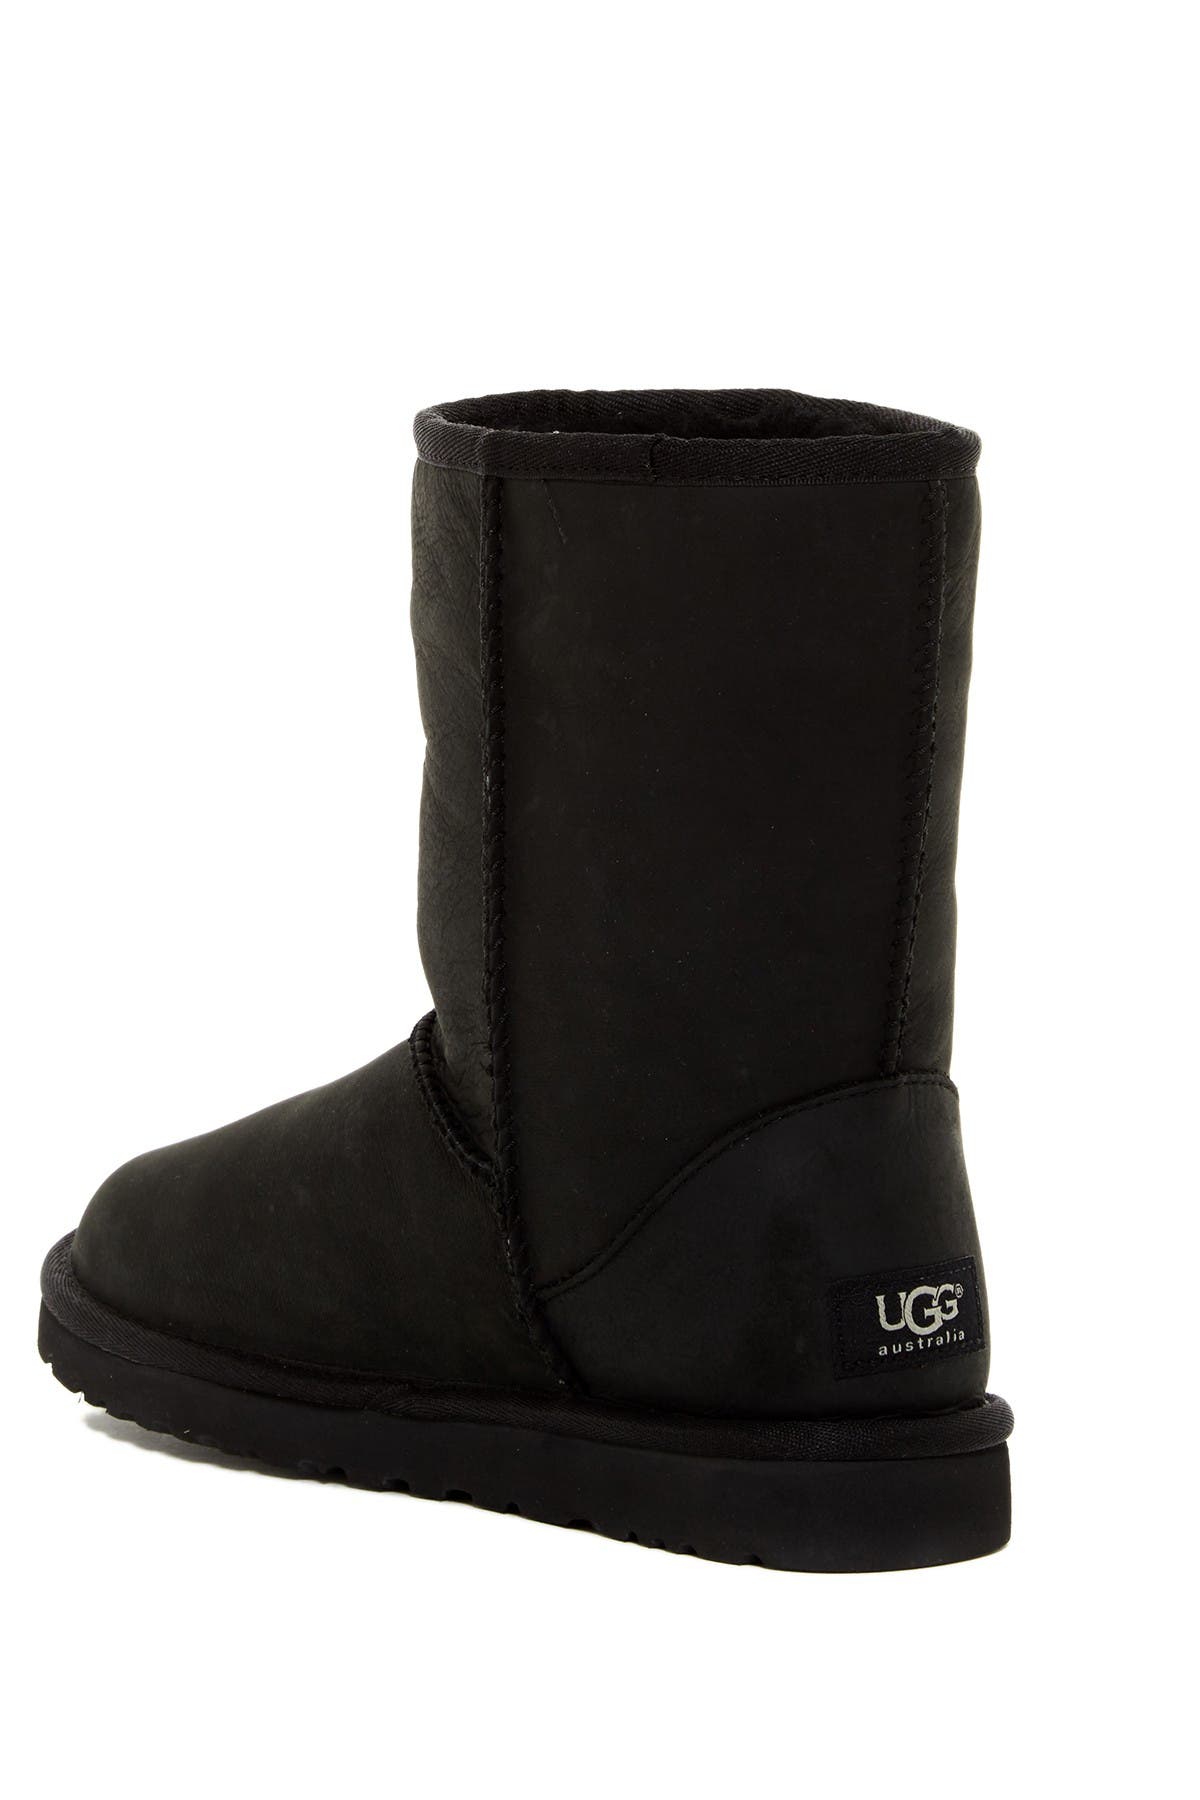 ugg leather fur lined boots